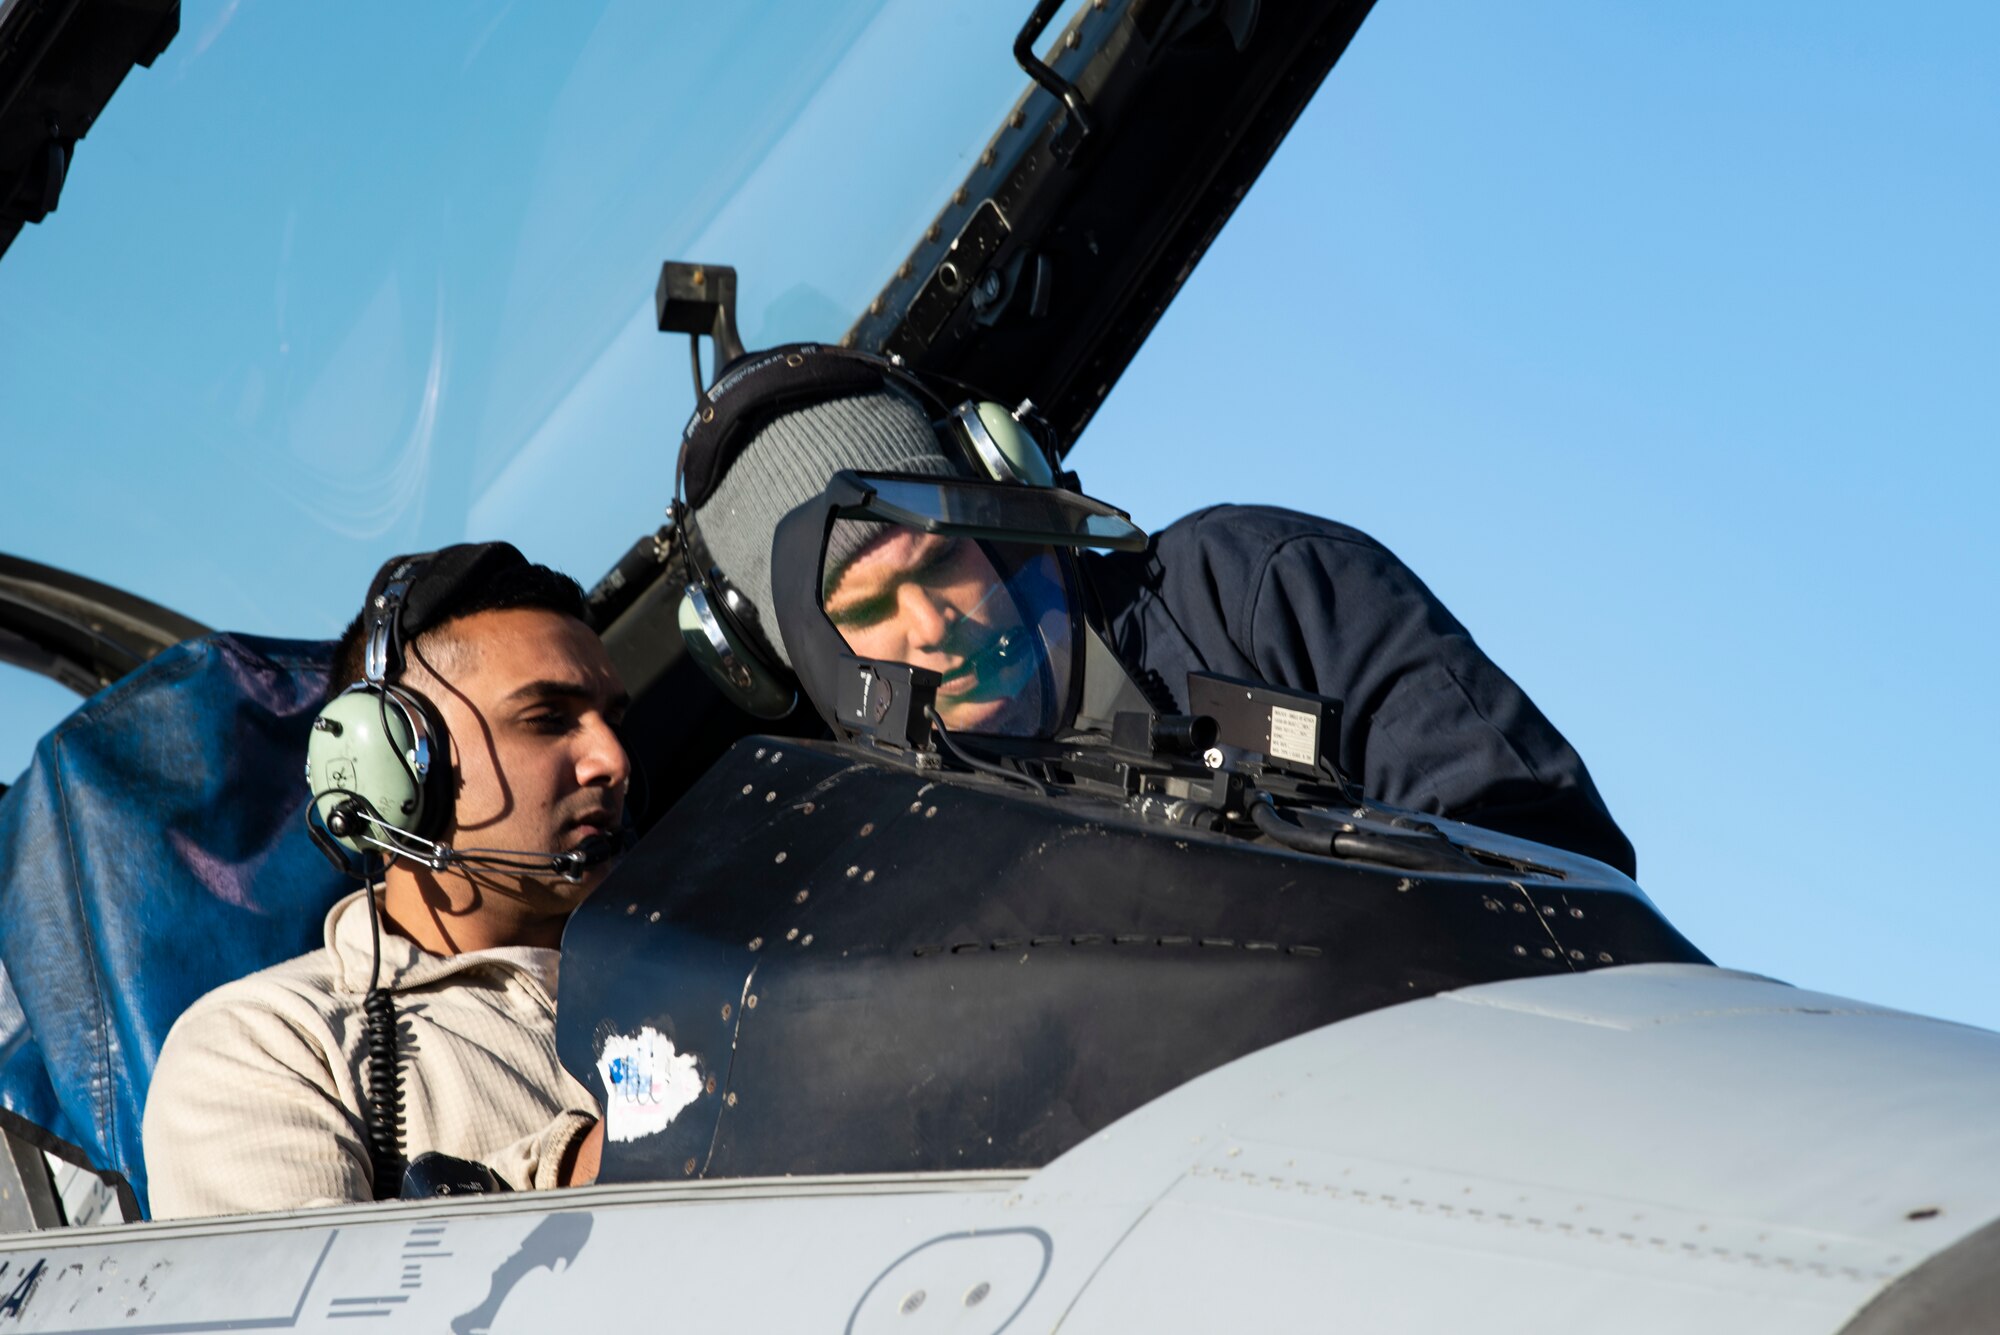 Staff Sgt. Mark Ward mentors Senior Airman Bheem Zohar as they conduct a flight control built in test for an F-16 Fighting Falcon October 25, 2018. Ward and Bheem are both crew chiefs assigned to the 80th Aircraft Maintenance Unit, which is at Eielson Air Force Base, Alaska participating in exercise Distant Frontier. Distant Frontier is a continuation of the training provided during RED FLAG-Alaska, but allows for a more tailored mission scenarios that can better meet participating unit's training objectives. (U.S. Air Force photo by Staff Sgt. Levi Rowse)